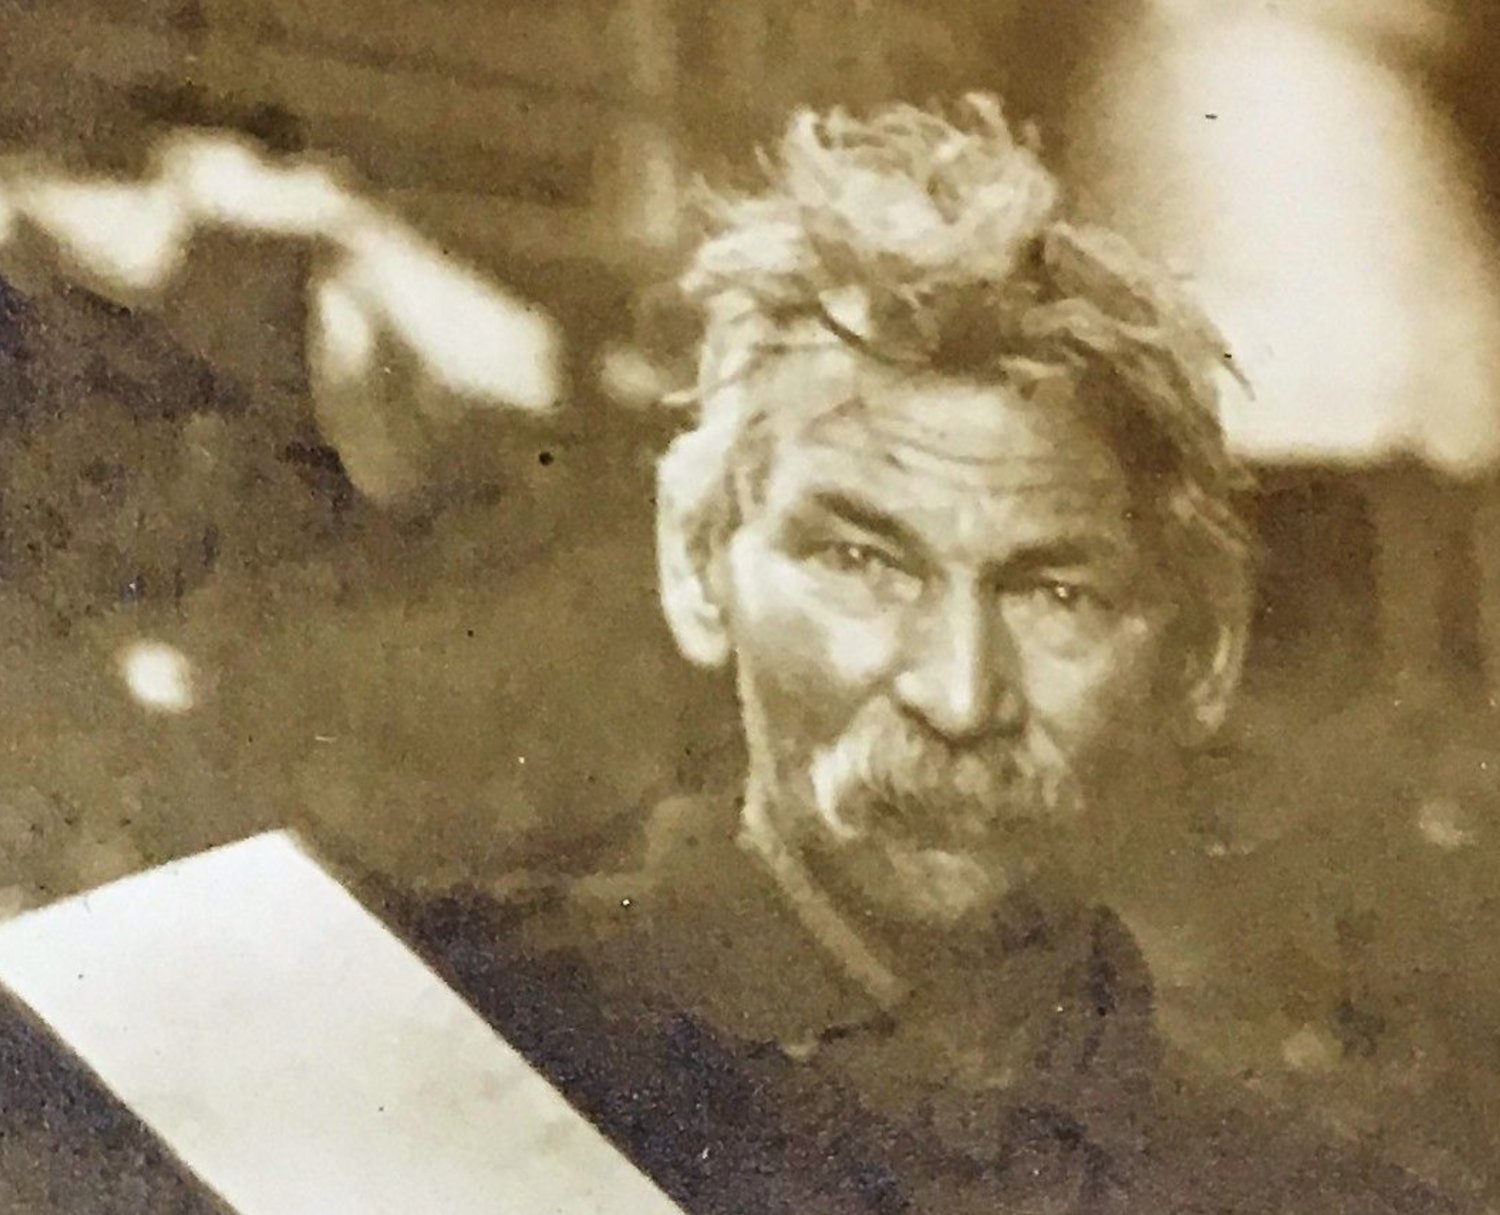 Daniel Shaner, a Civil War veteran who later lived more than three decades in the Mossyrock area, is pictured in this photograph.